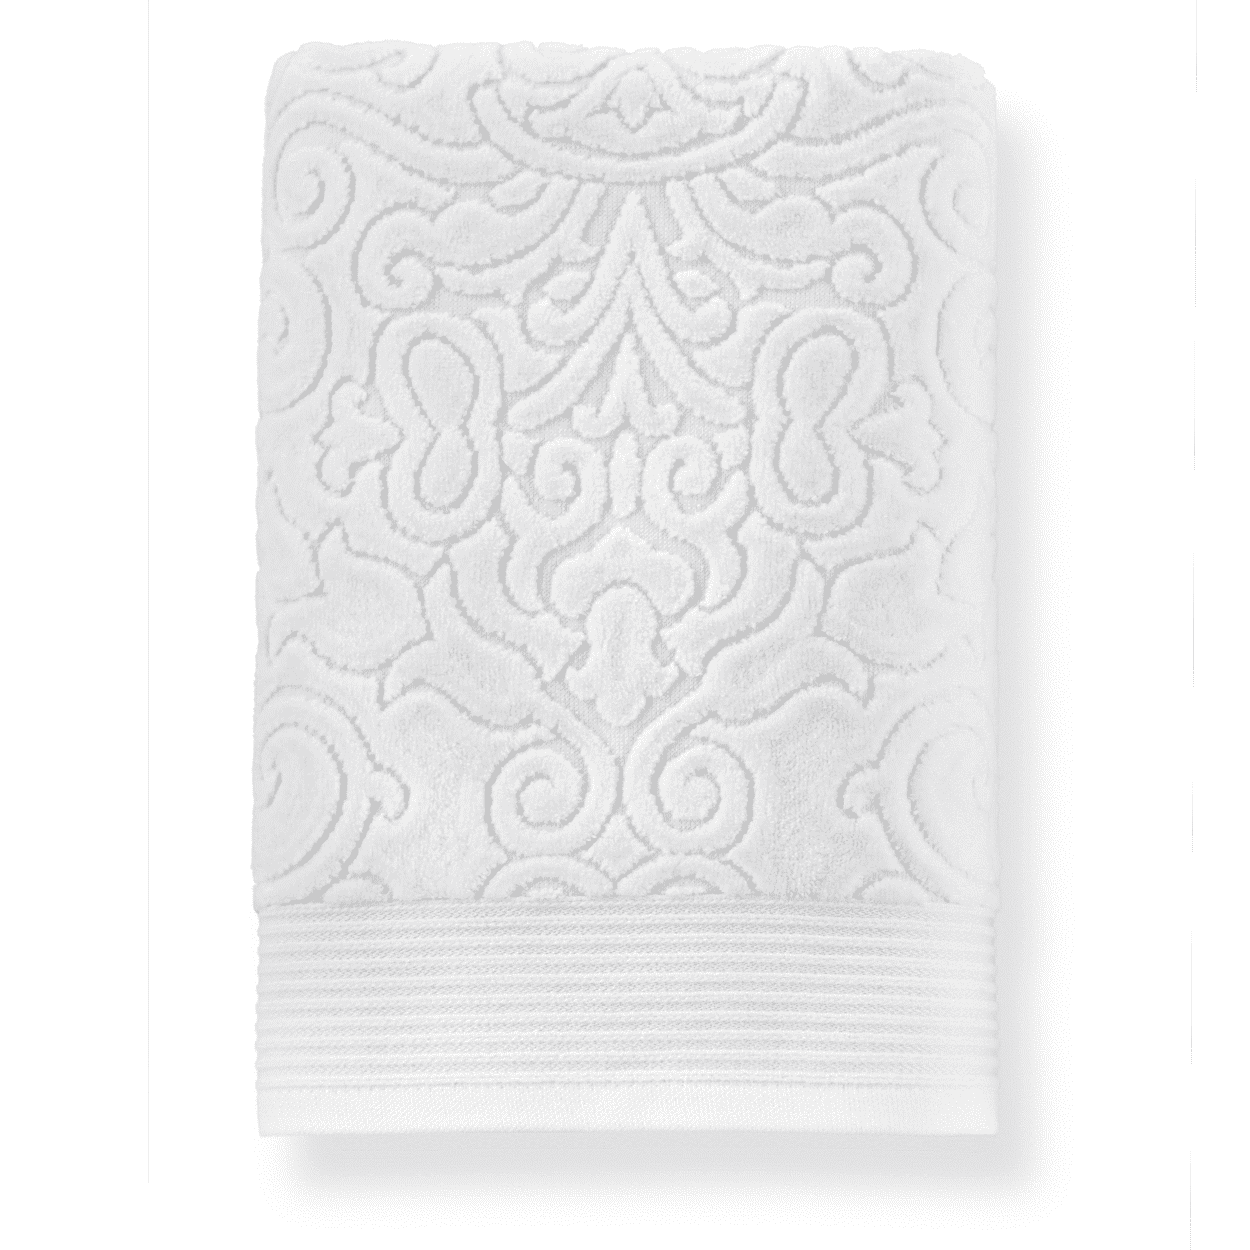 Spa Towel Collection by Peacock Alley – Everett Stunz